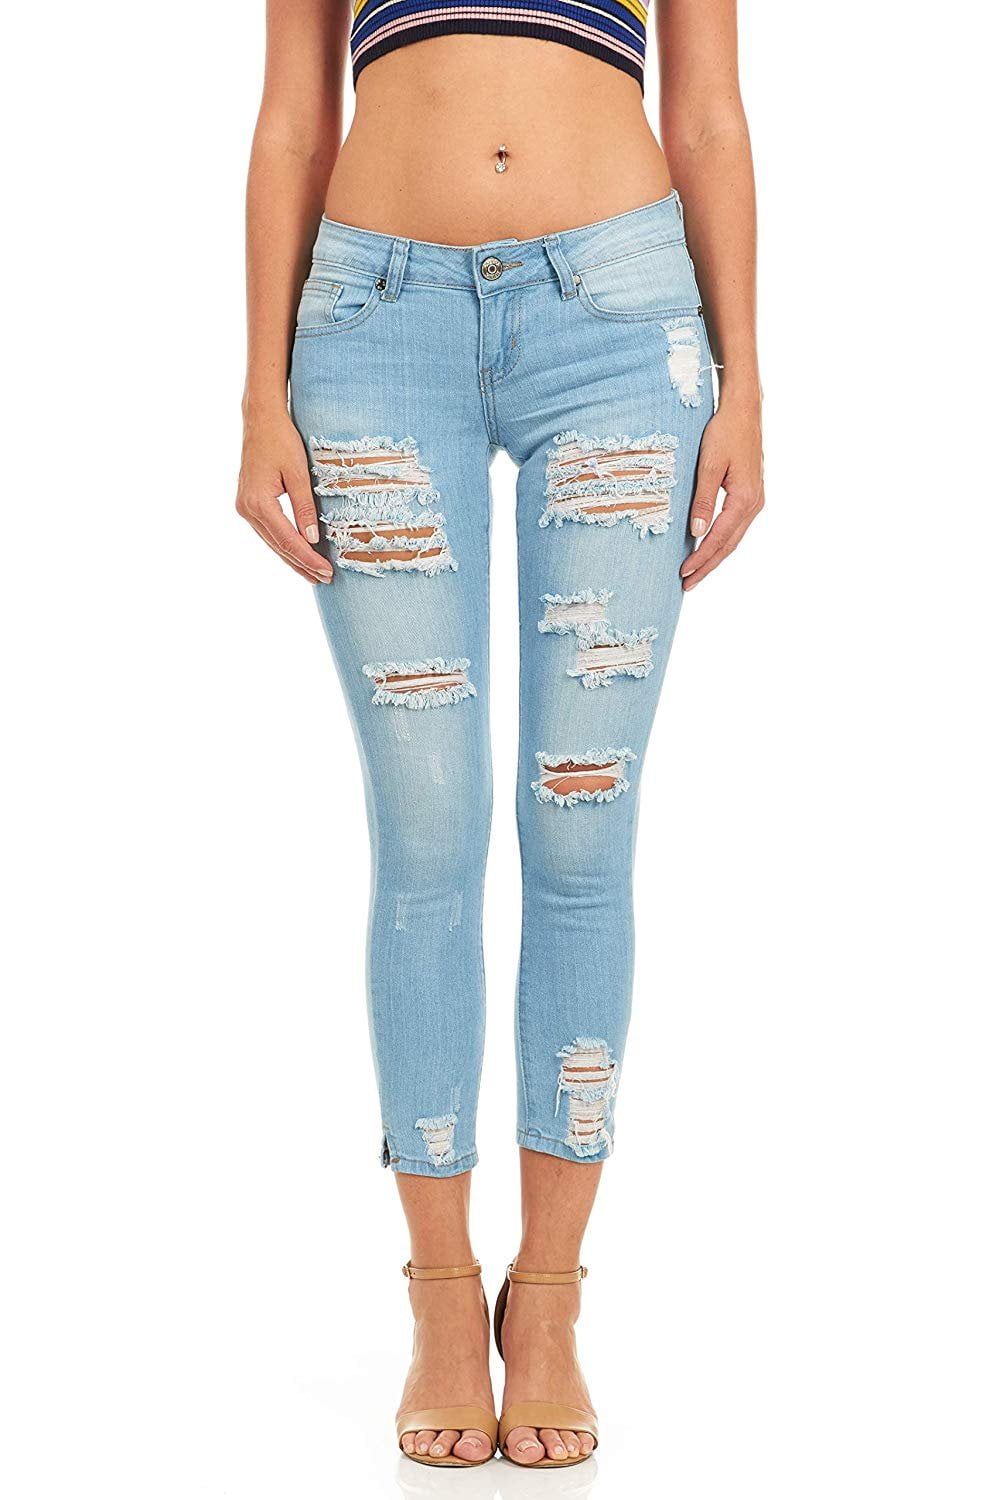 sink Hearing impaired cover VIP Jeans Teen Girls's Distressed Torn Juniors Skinny Jeans Light Wash  Juniors Size 7/8 - Walmart.com